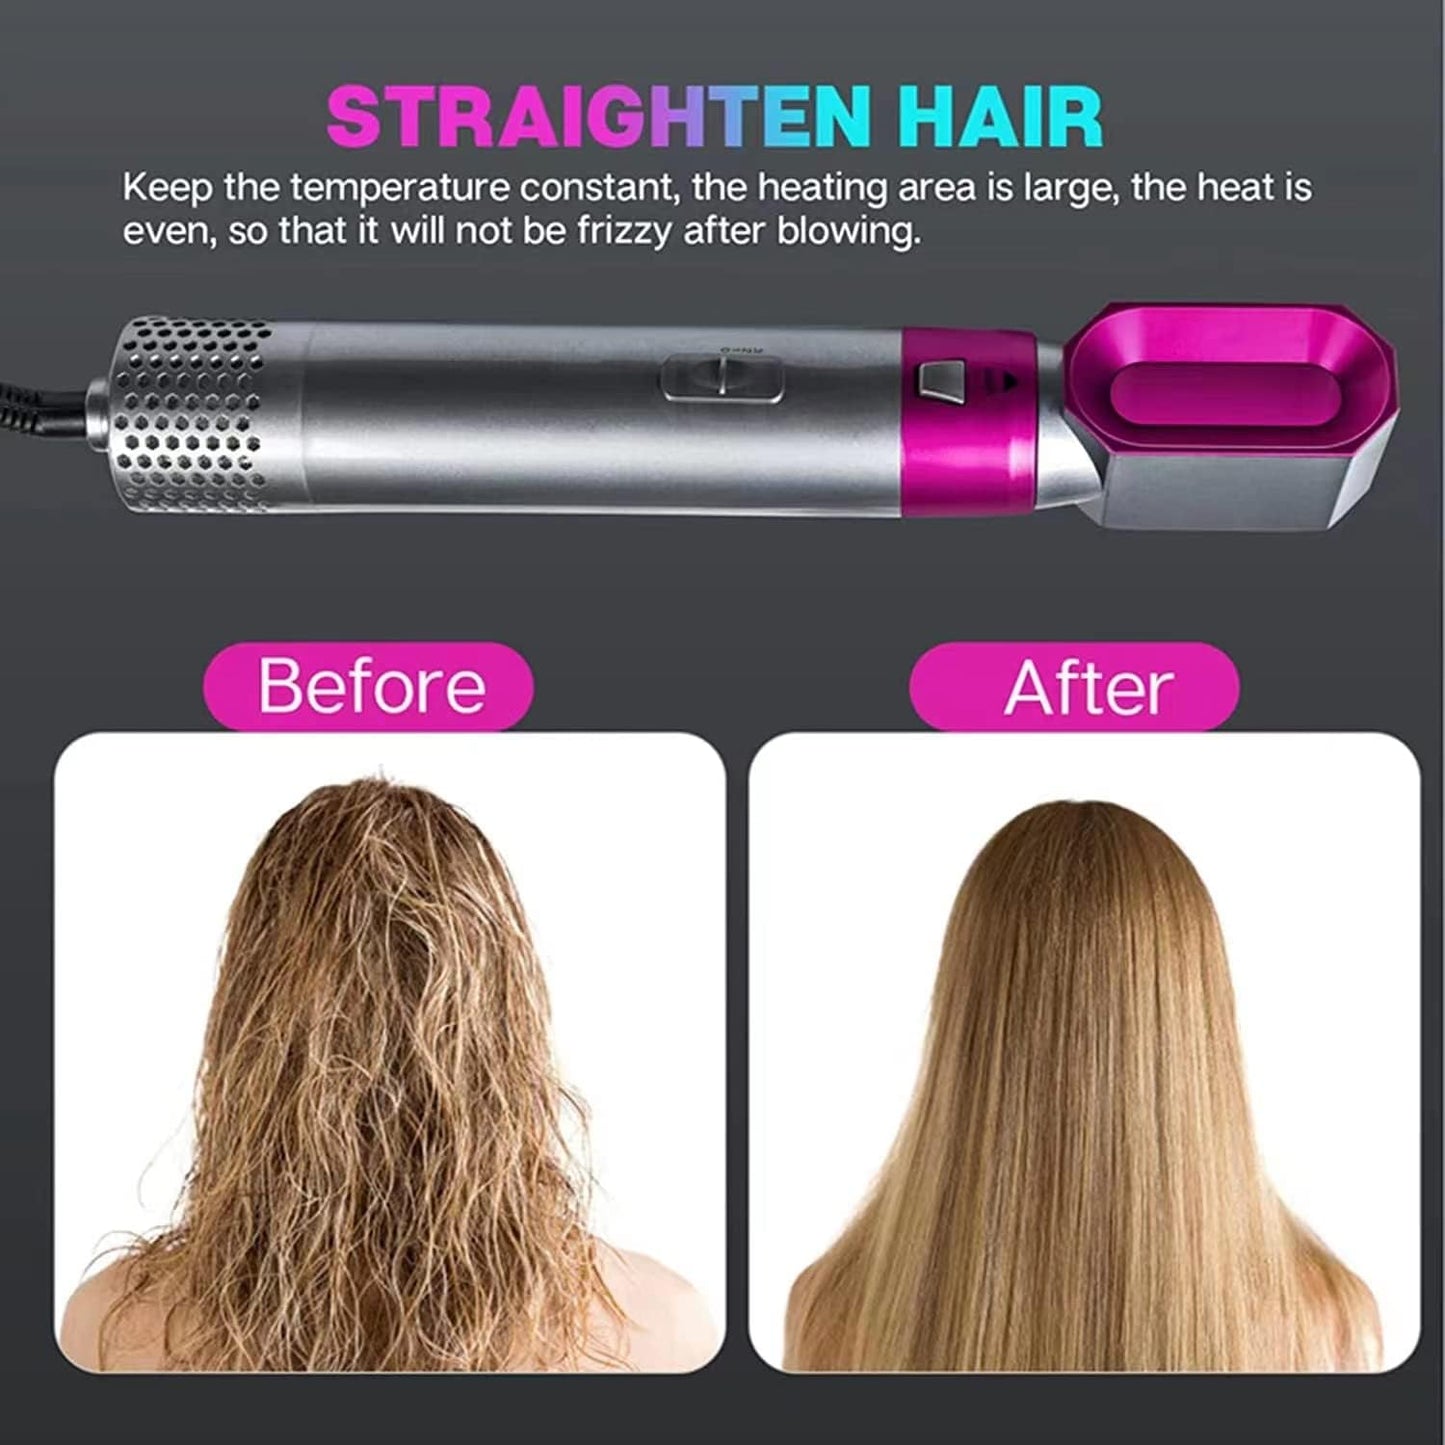 THE 5 IN 1 HAIRSTYLER PRO️™️